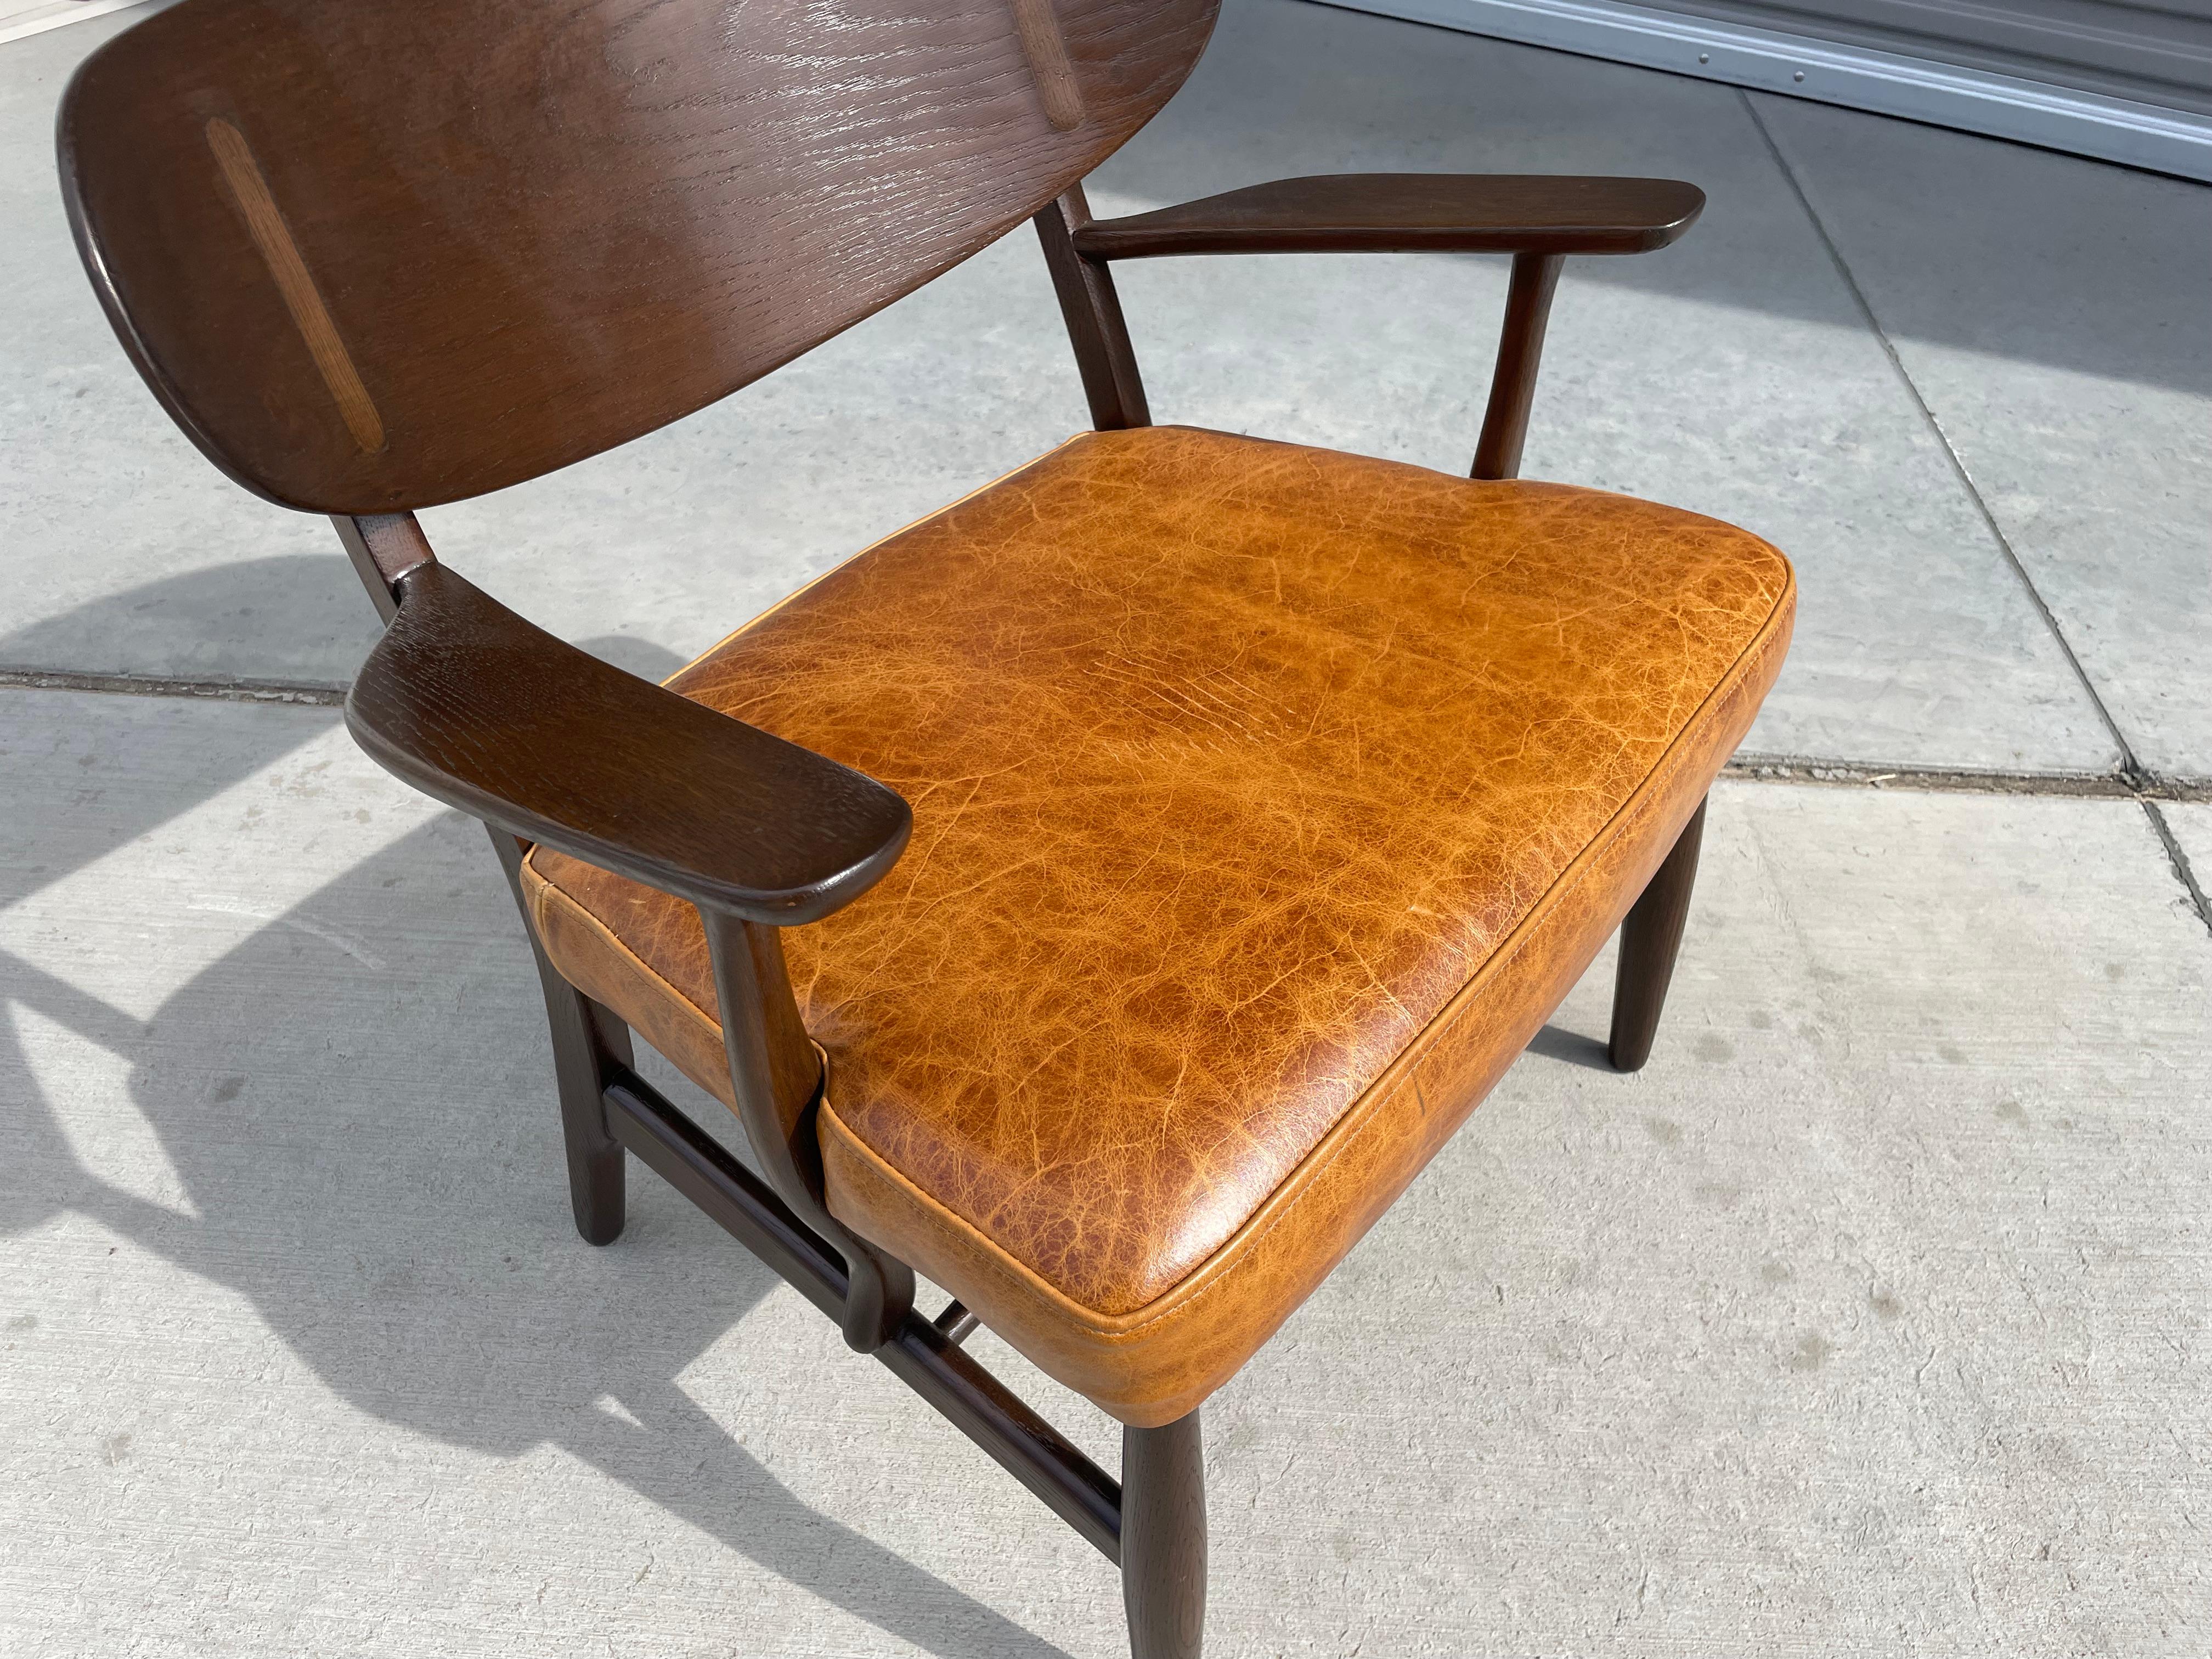 Midcentury Ch-22 Lounge Chair by Hans Wegner for Carl Hansen In Good Condition For Sale In North Hollywood, CA